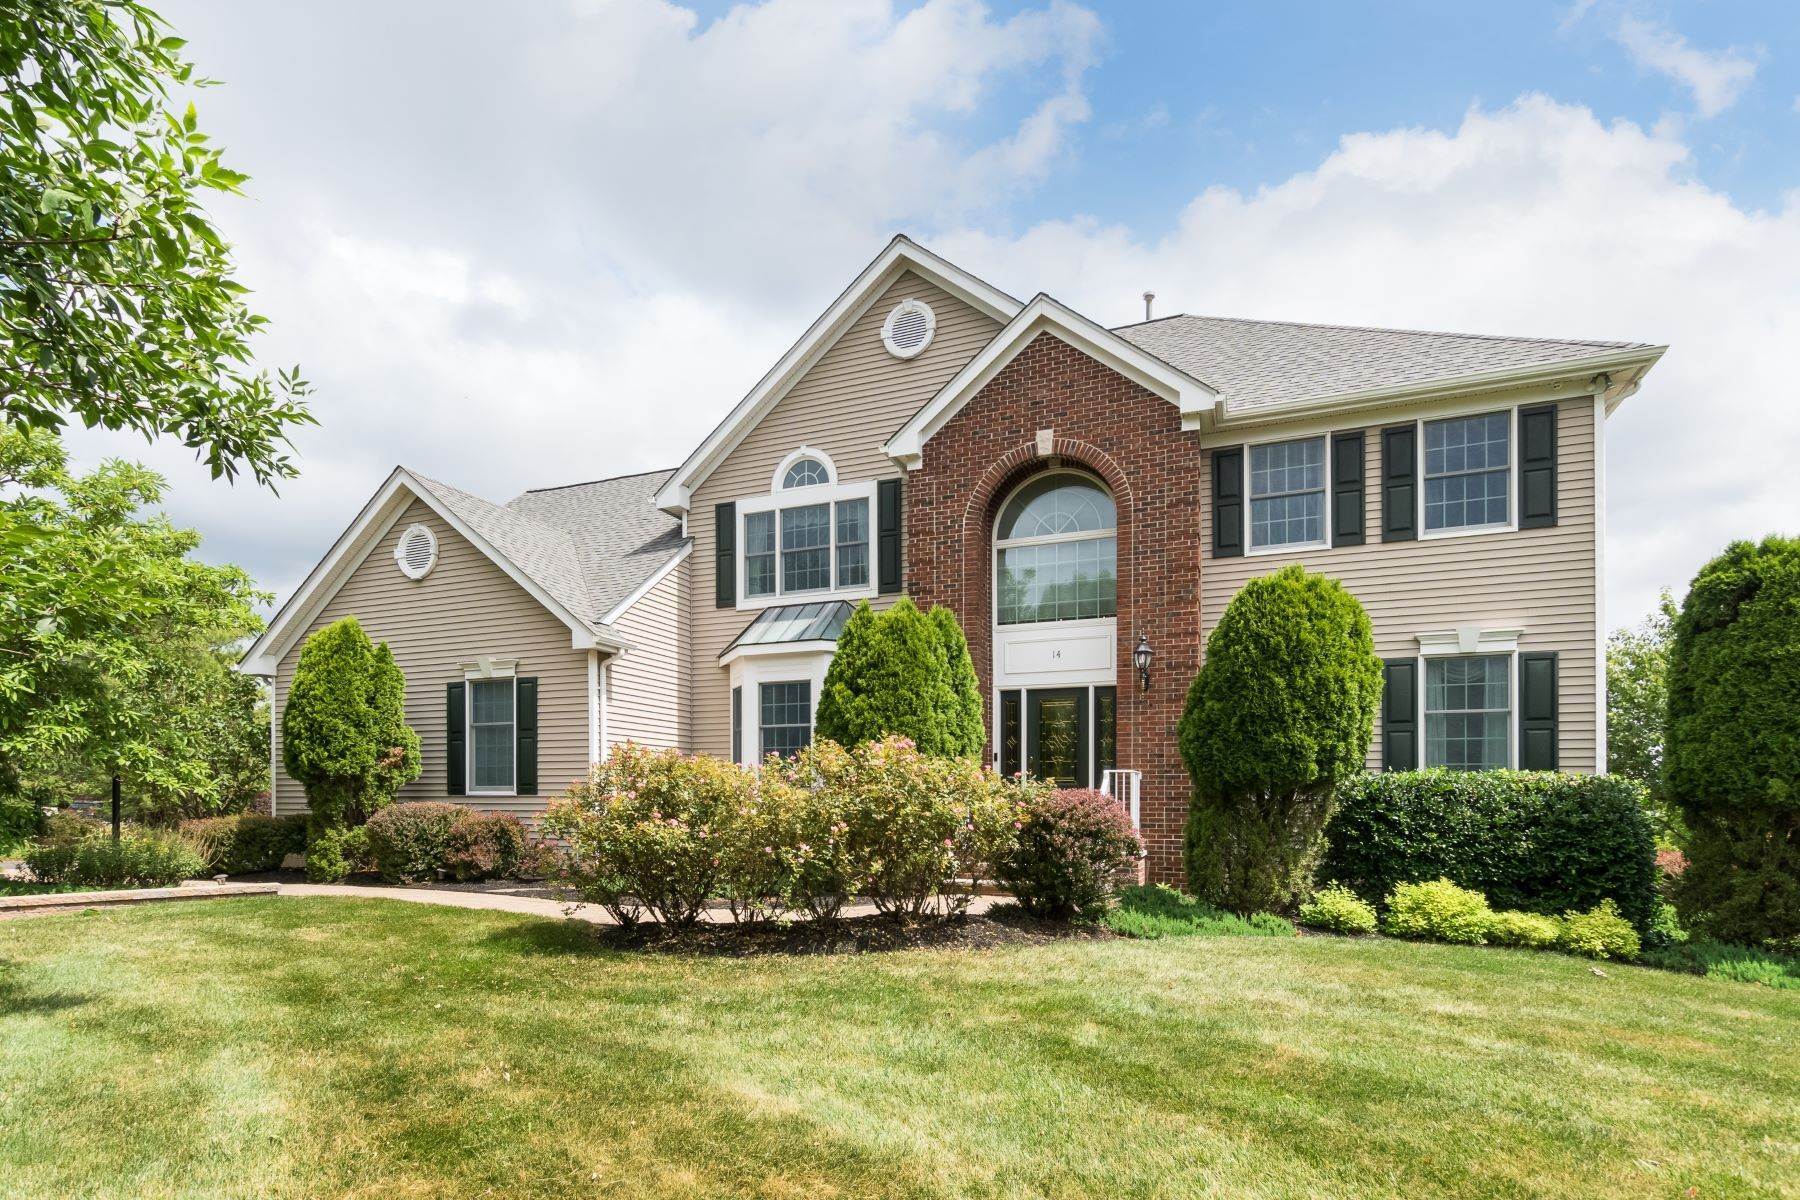 Single Family Homes for Sale at Gorgeous Views on a Kings Crossing Cul de Sac 14 Breckenridge Court, Belle Mead, New Jersey 08502 United States